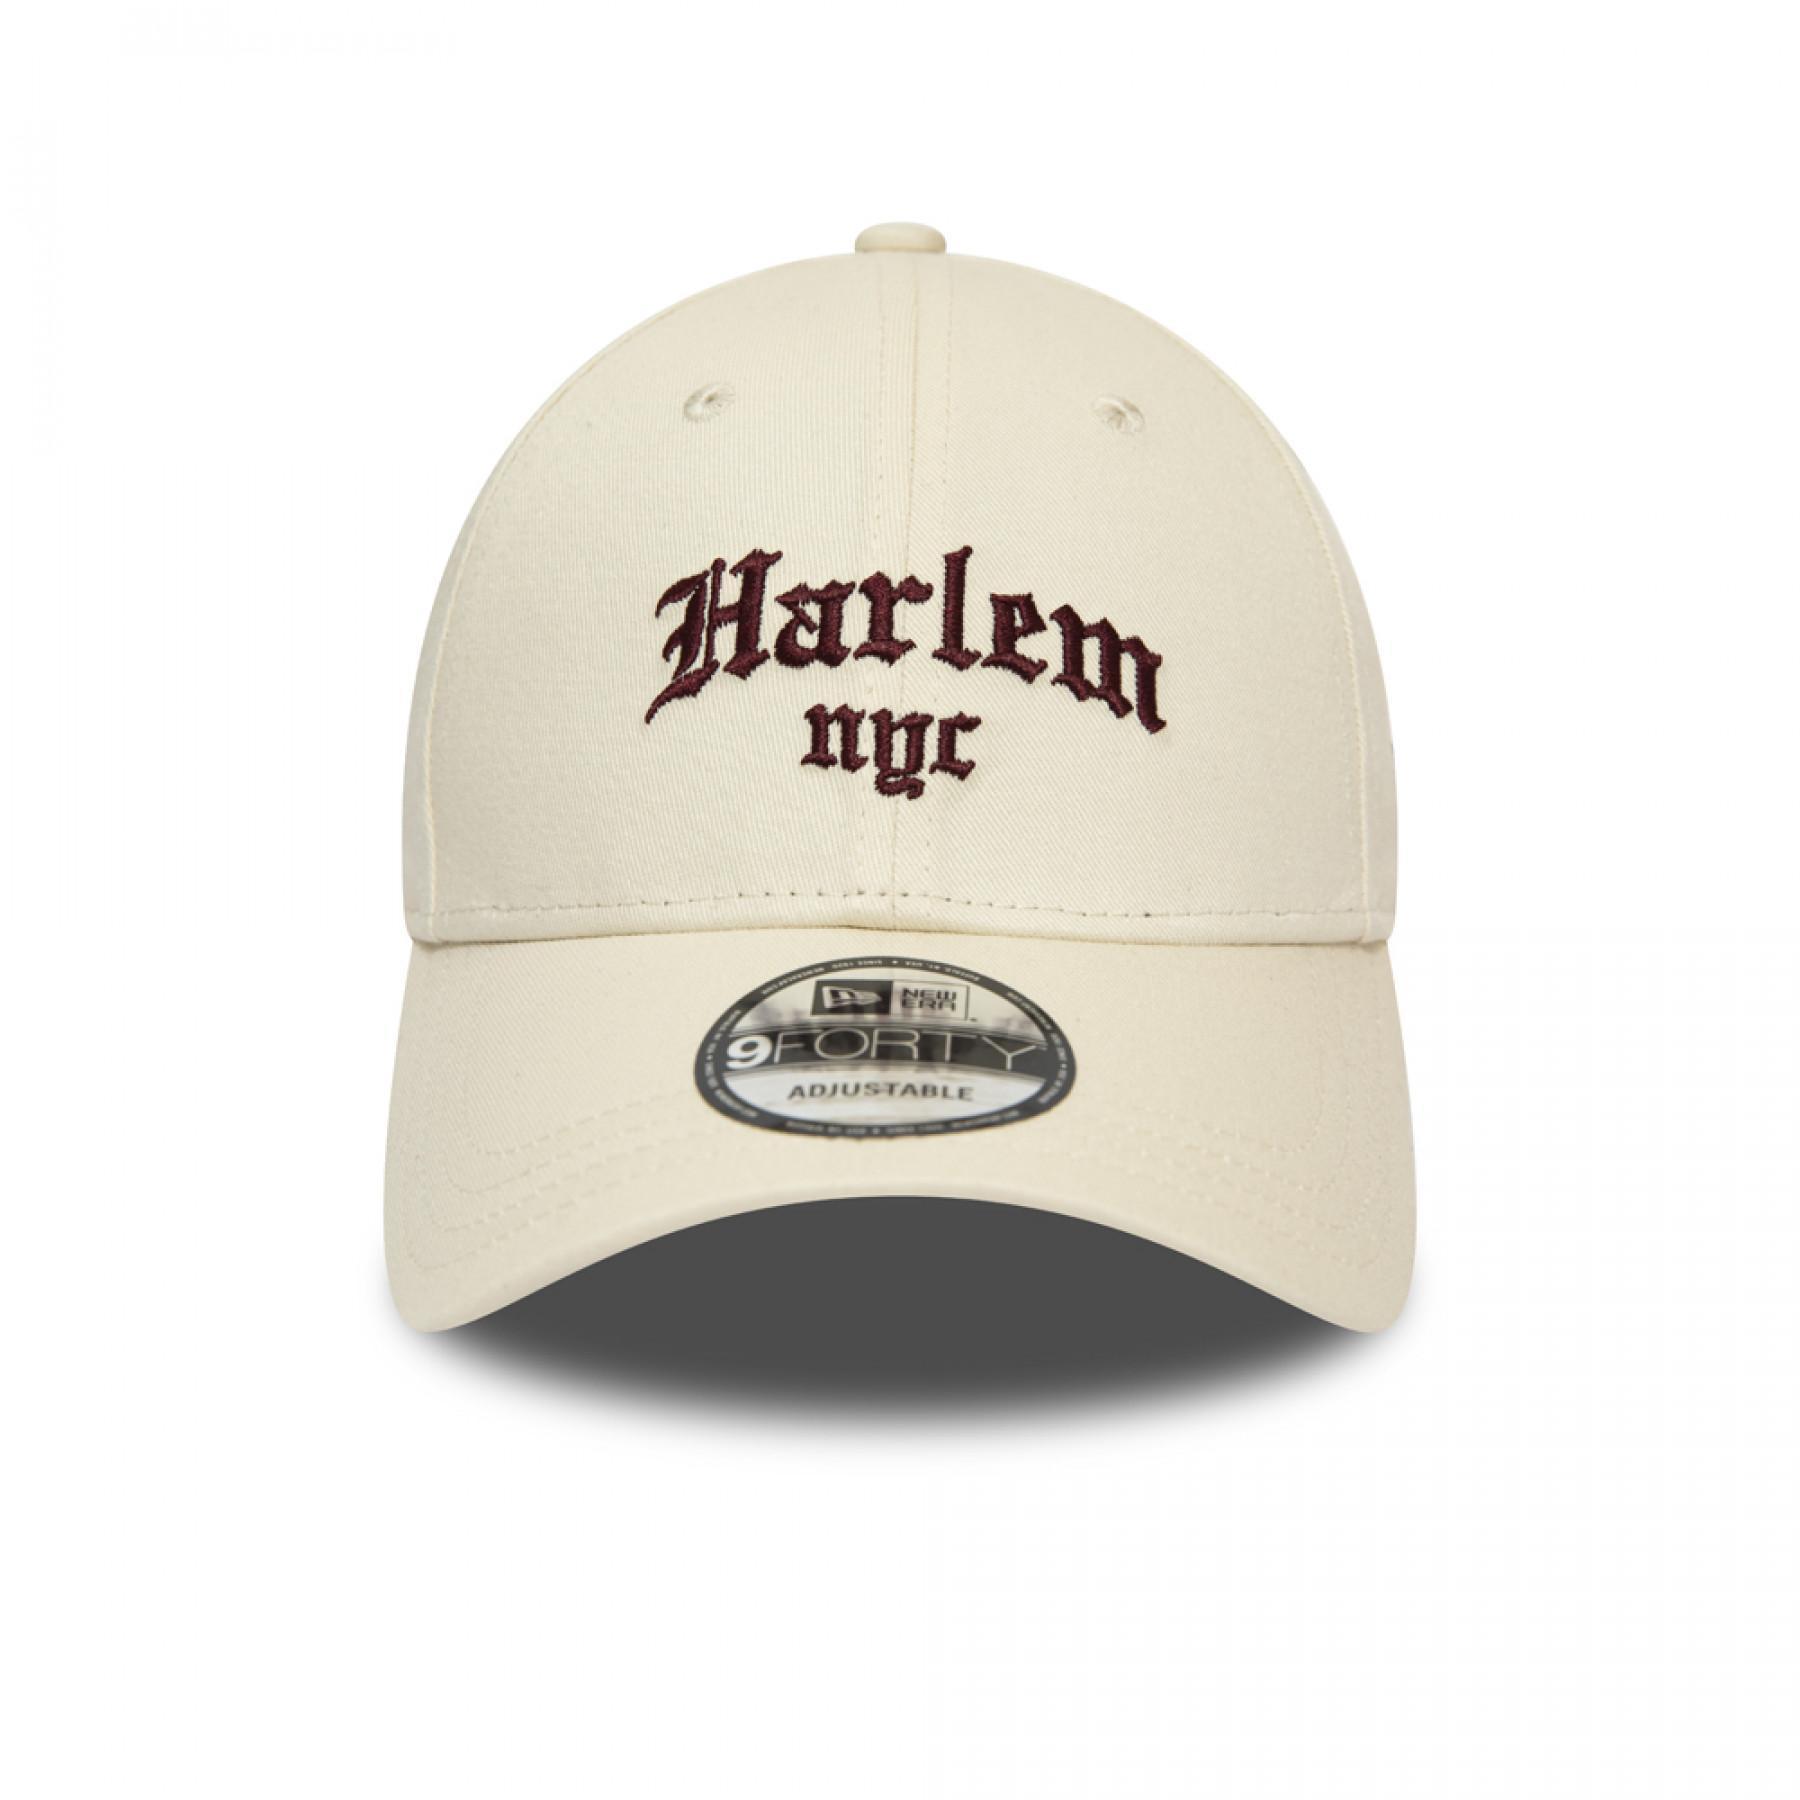 Casquette New Era 9Forty NYC Harlem